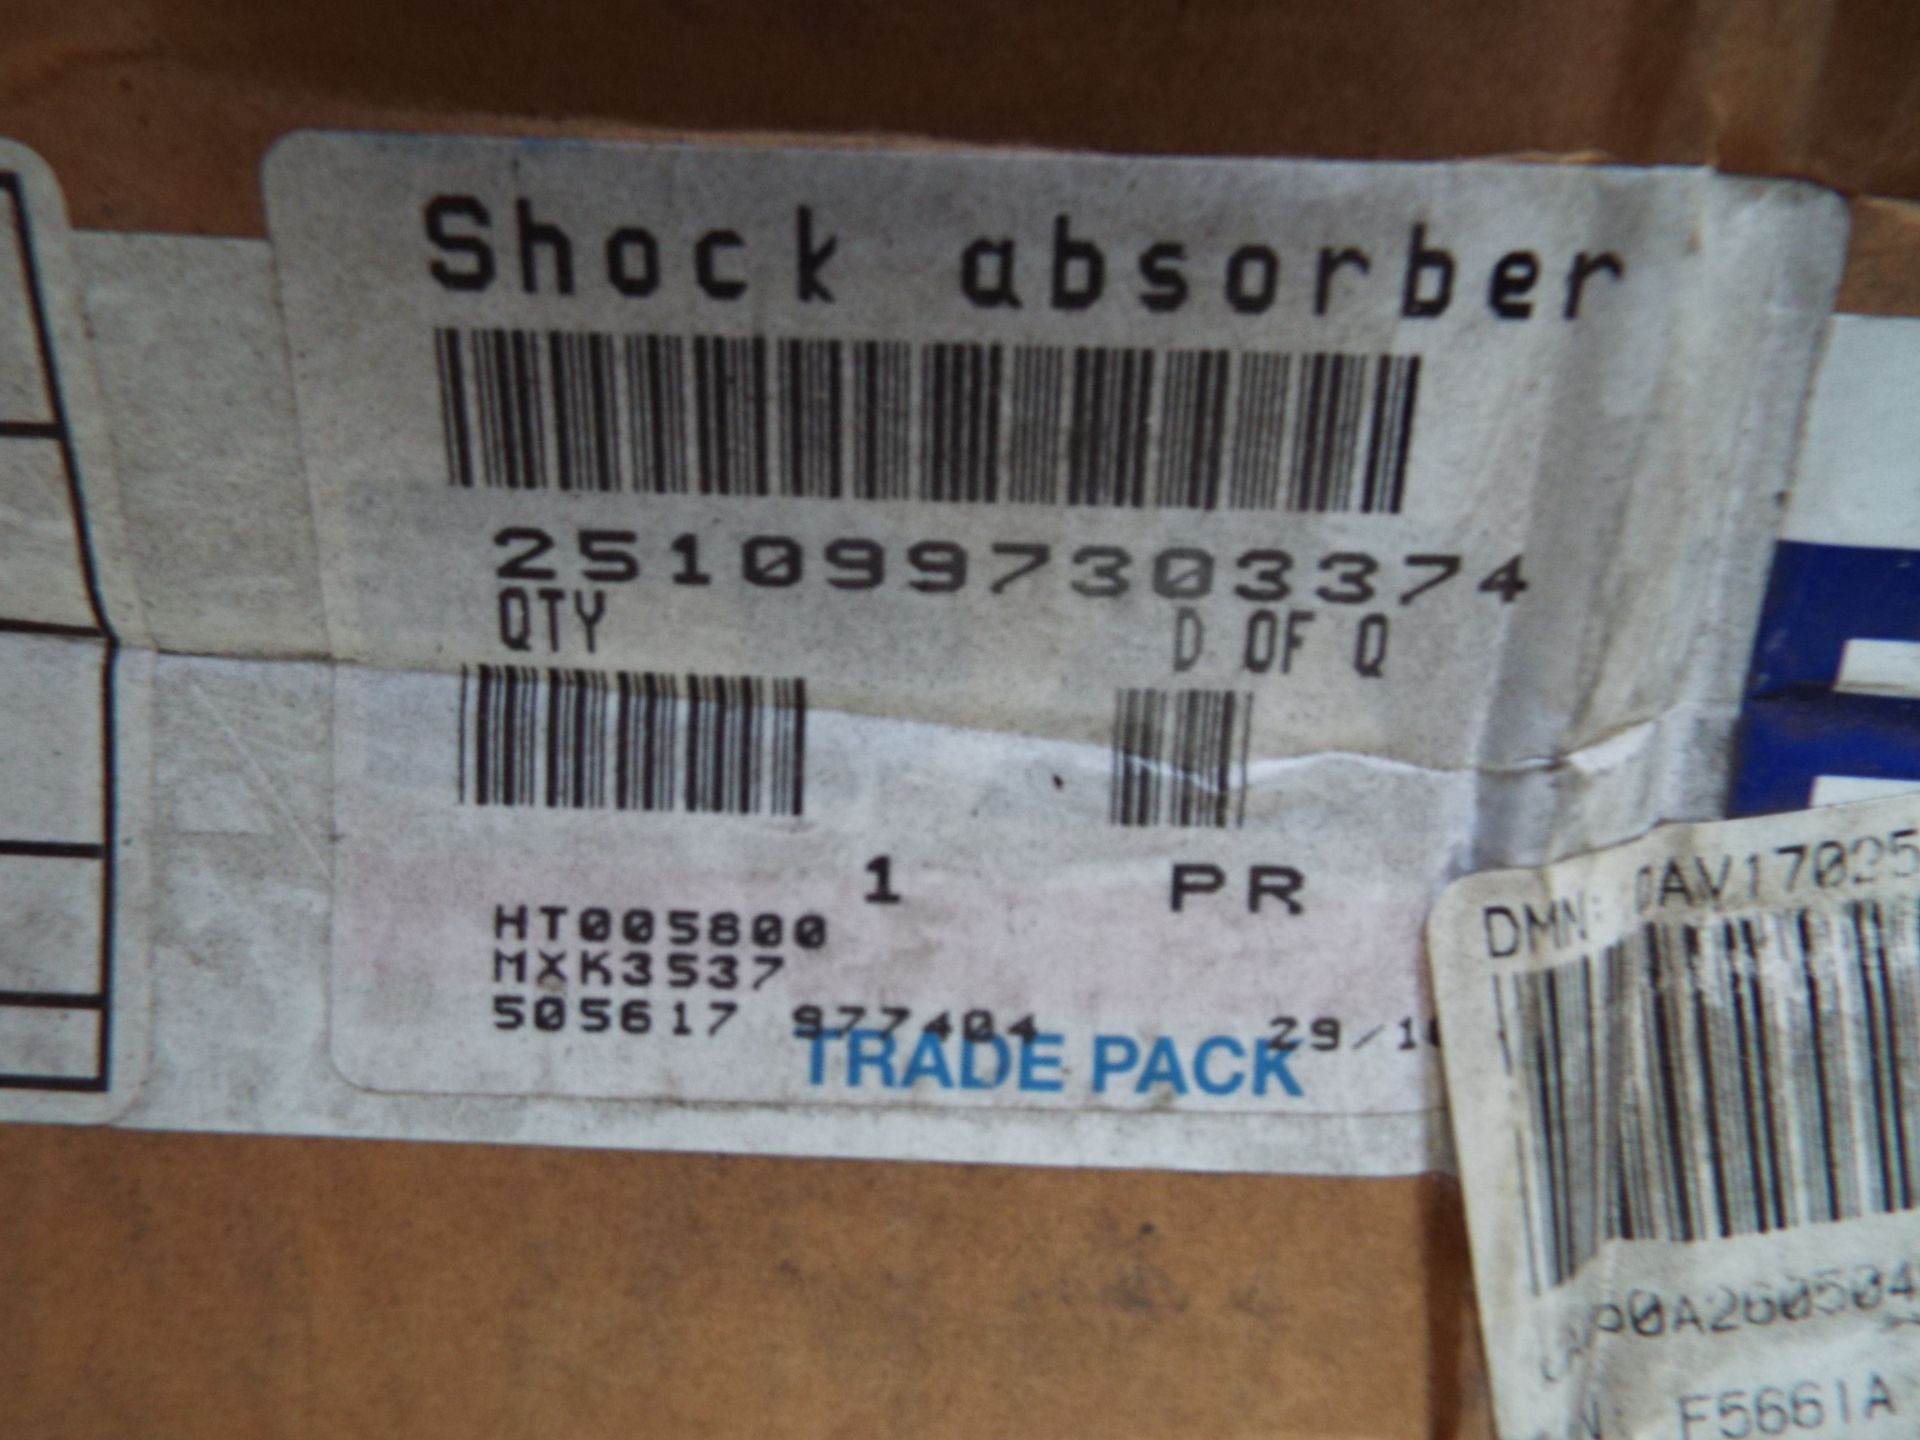 6 x DAF Shock Absorbers P/No MXK3537 - Image 4 of 4